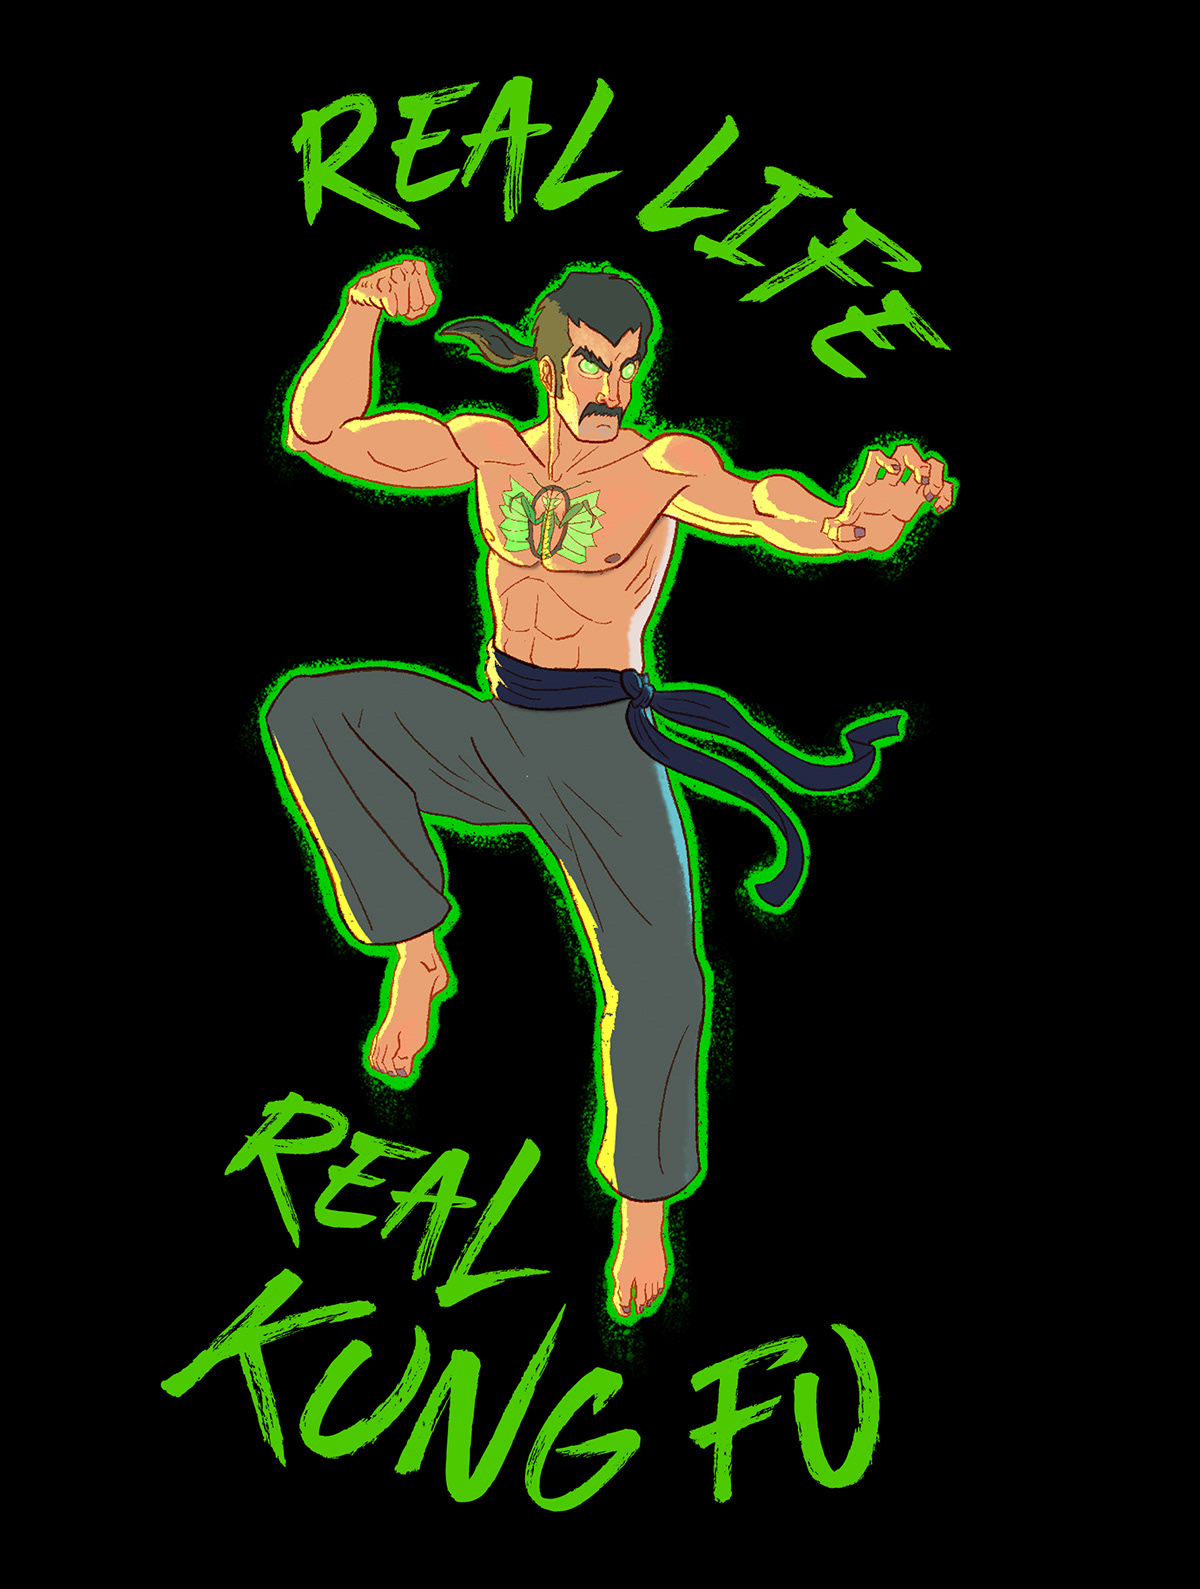 This is a shirt I designed and illustrated for a local martial art studio.